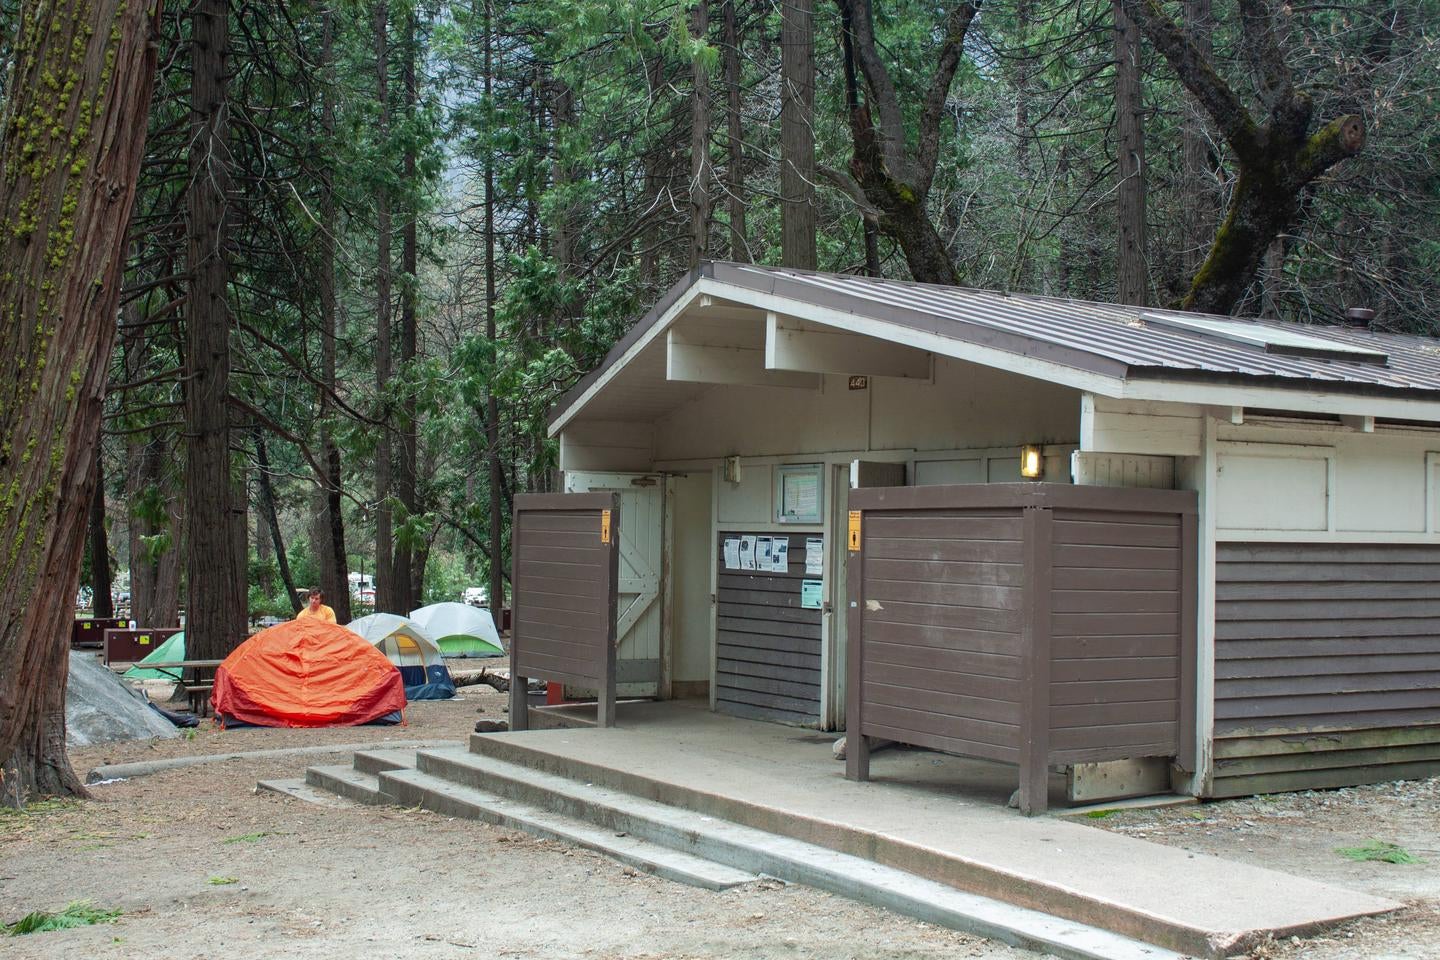 Camp 4 restrooms



This is a photo of the restrooms at Camp 4 campground

Credit: Yosemite National Park